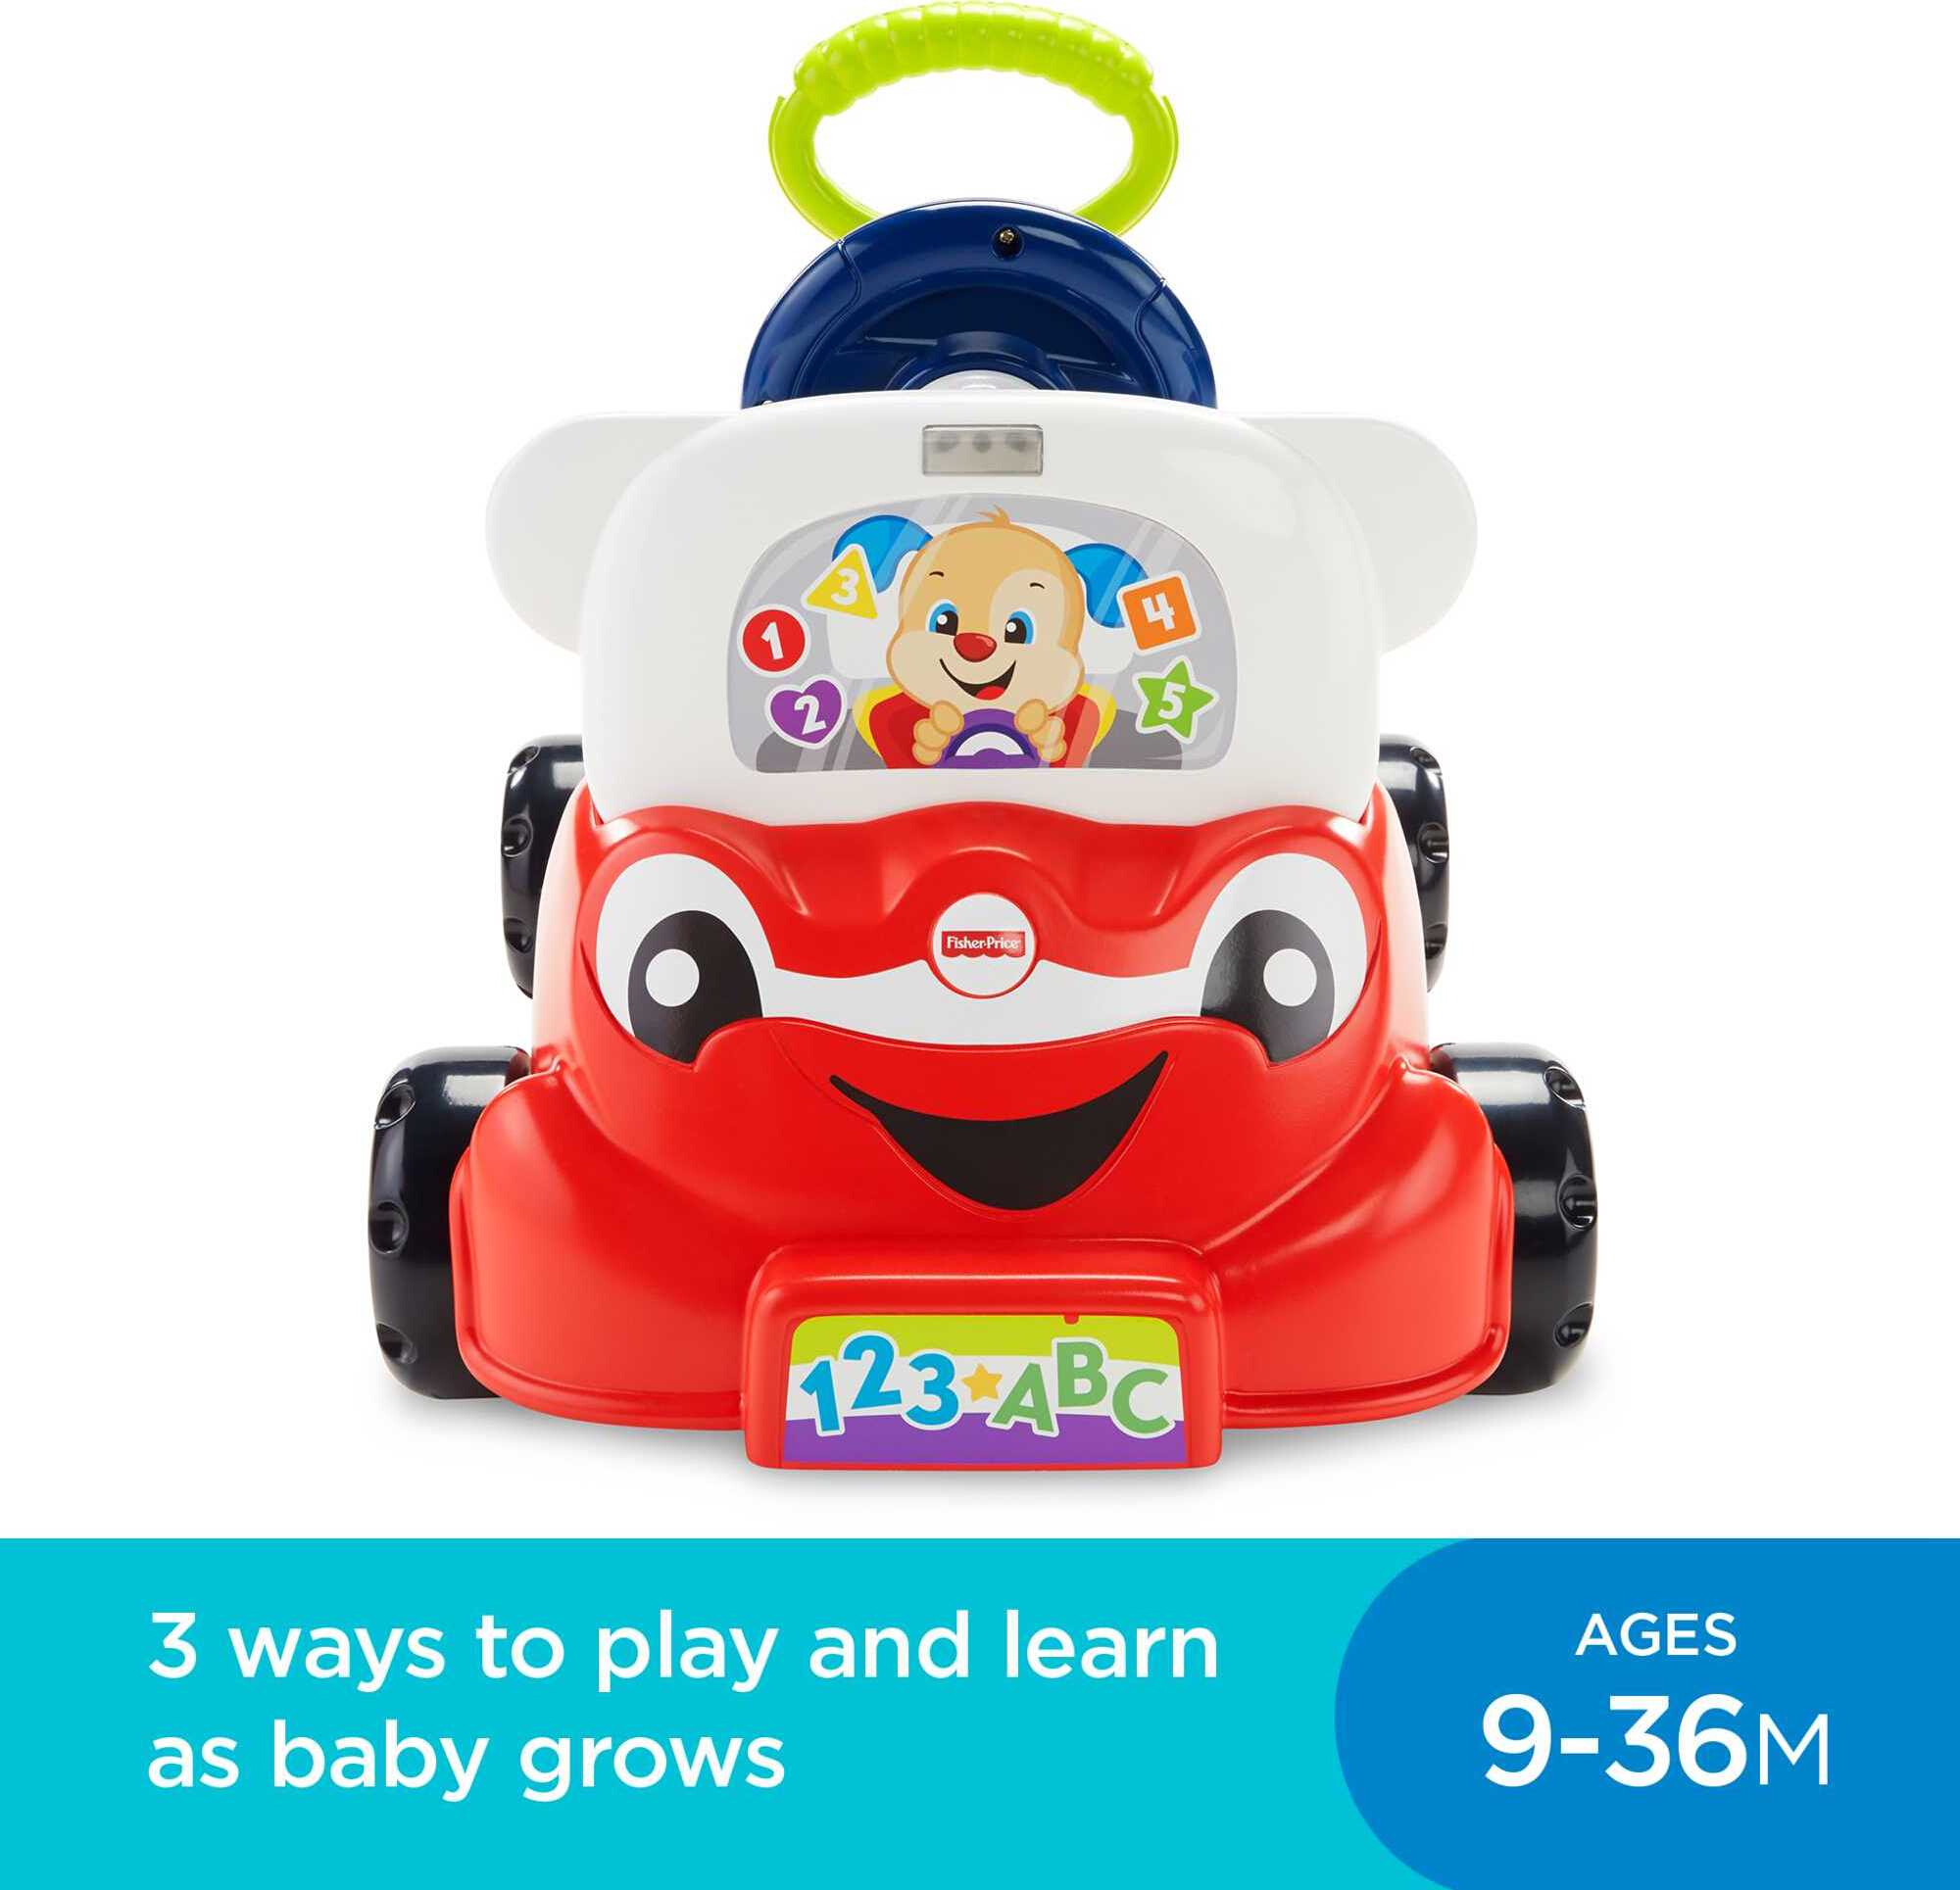 Fisher-Price Laugh & Learn 3-in-1 Smart Car Interactive Infant Walker & Toddler Ride-On Toy - image 4 of 9